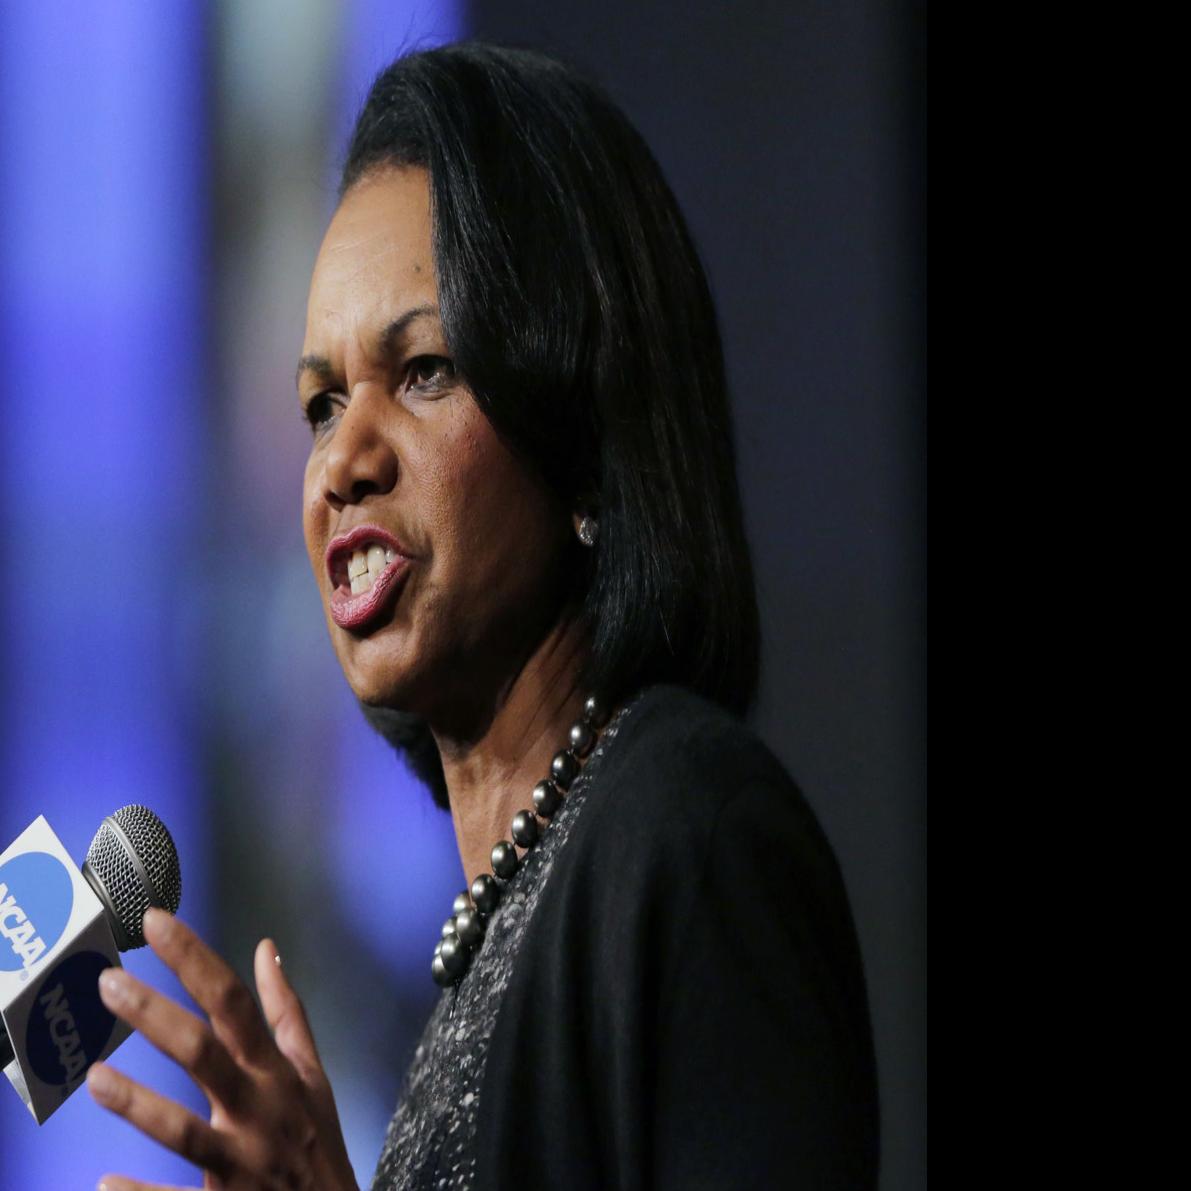 Condoleezza Rice Added to Broncos' New Ownership Group